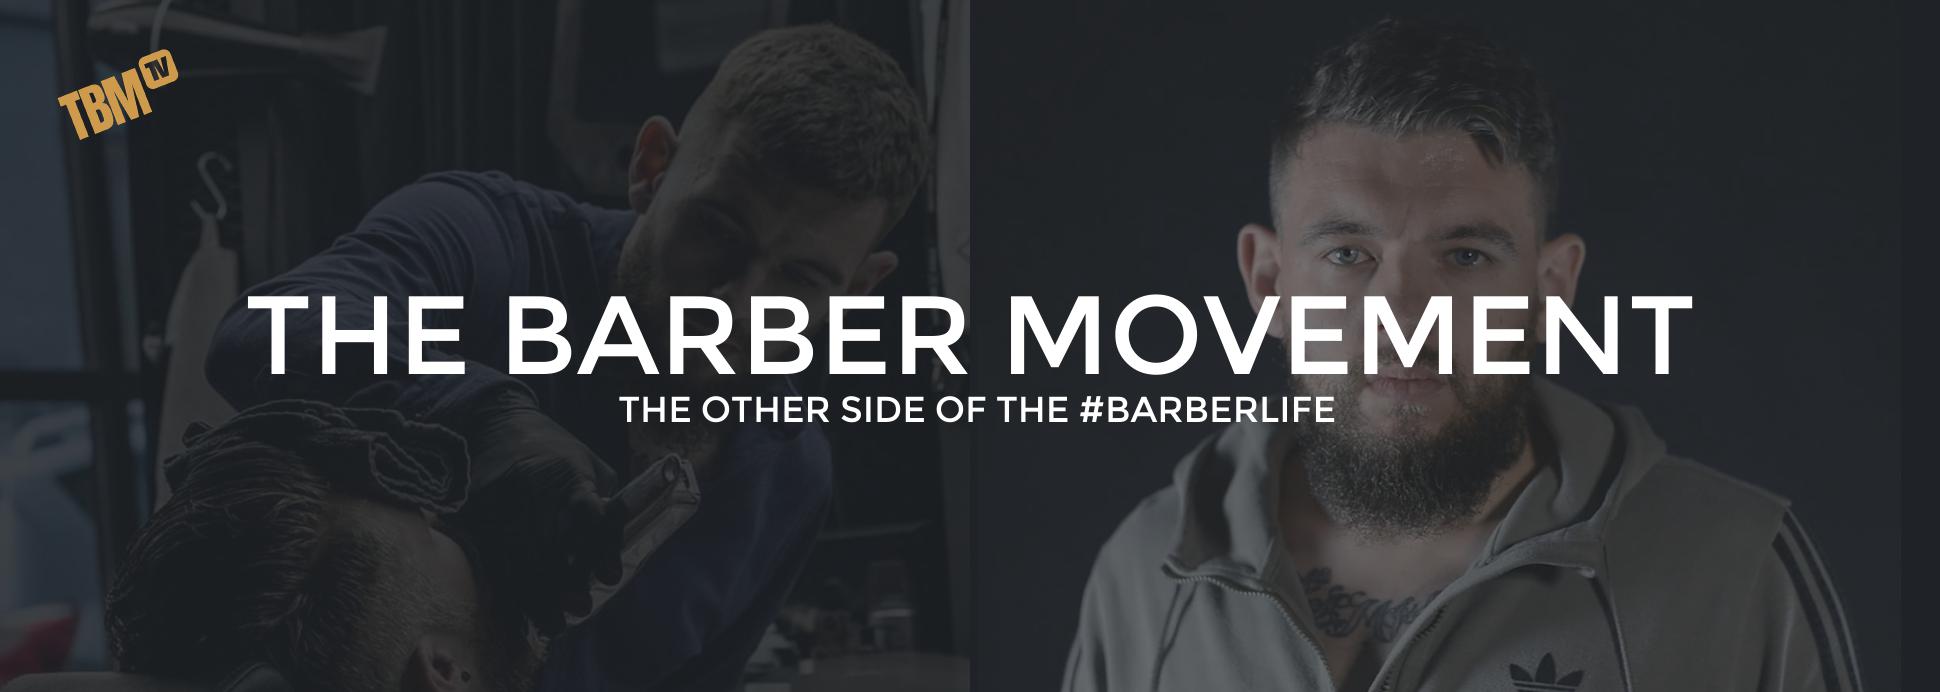 The Barber Movement